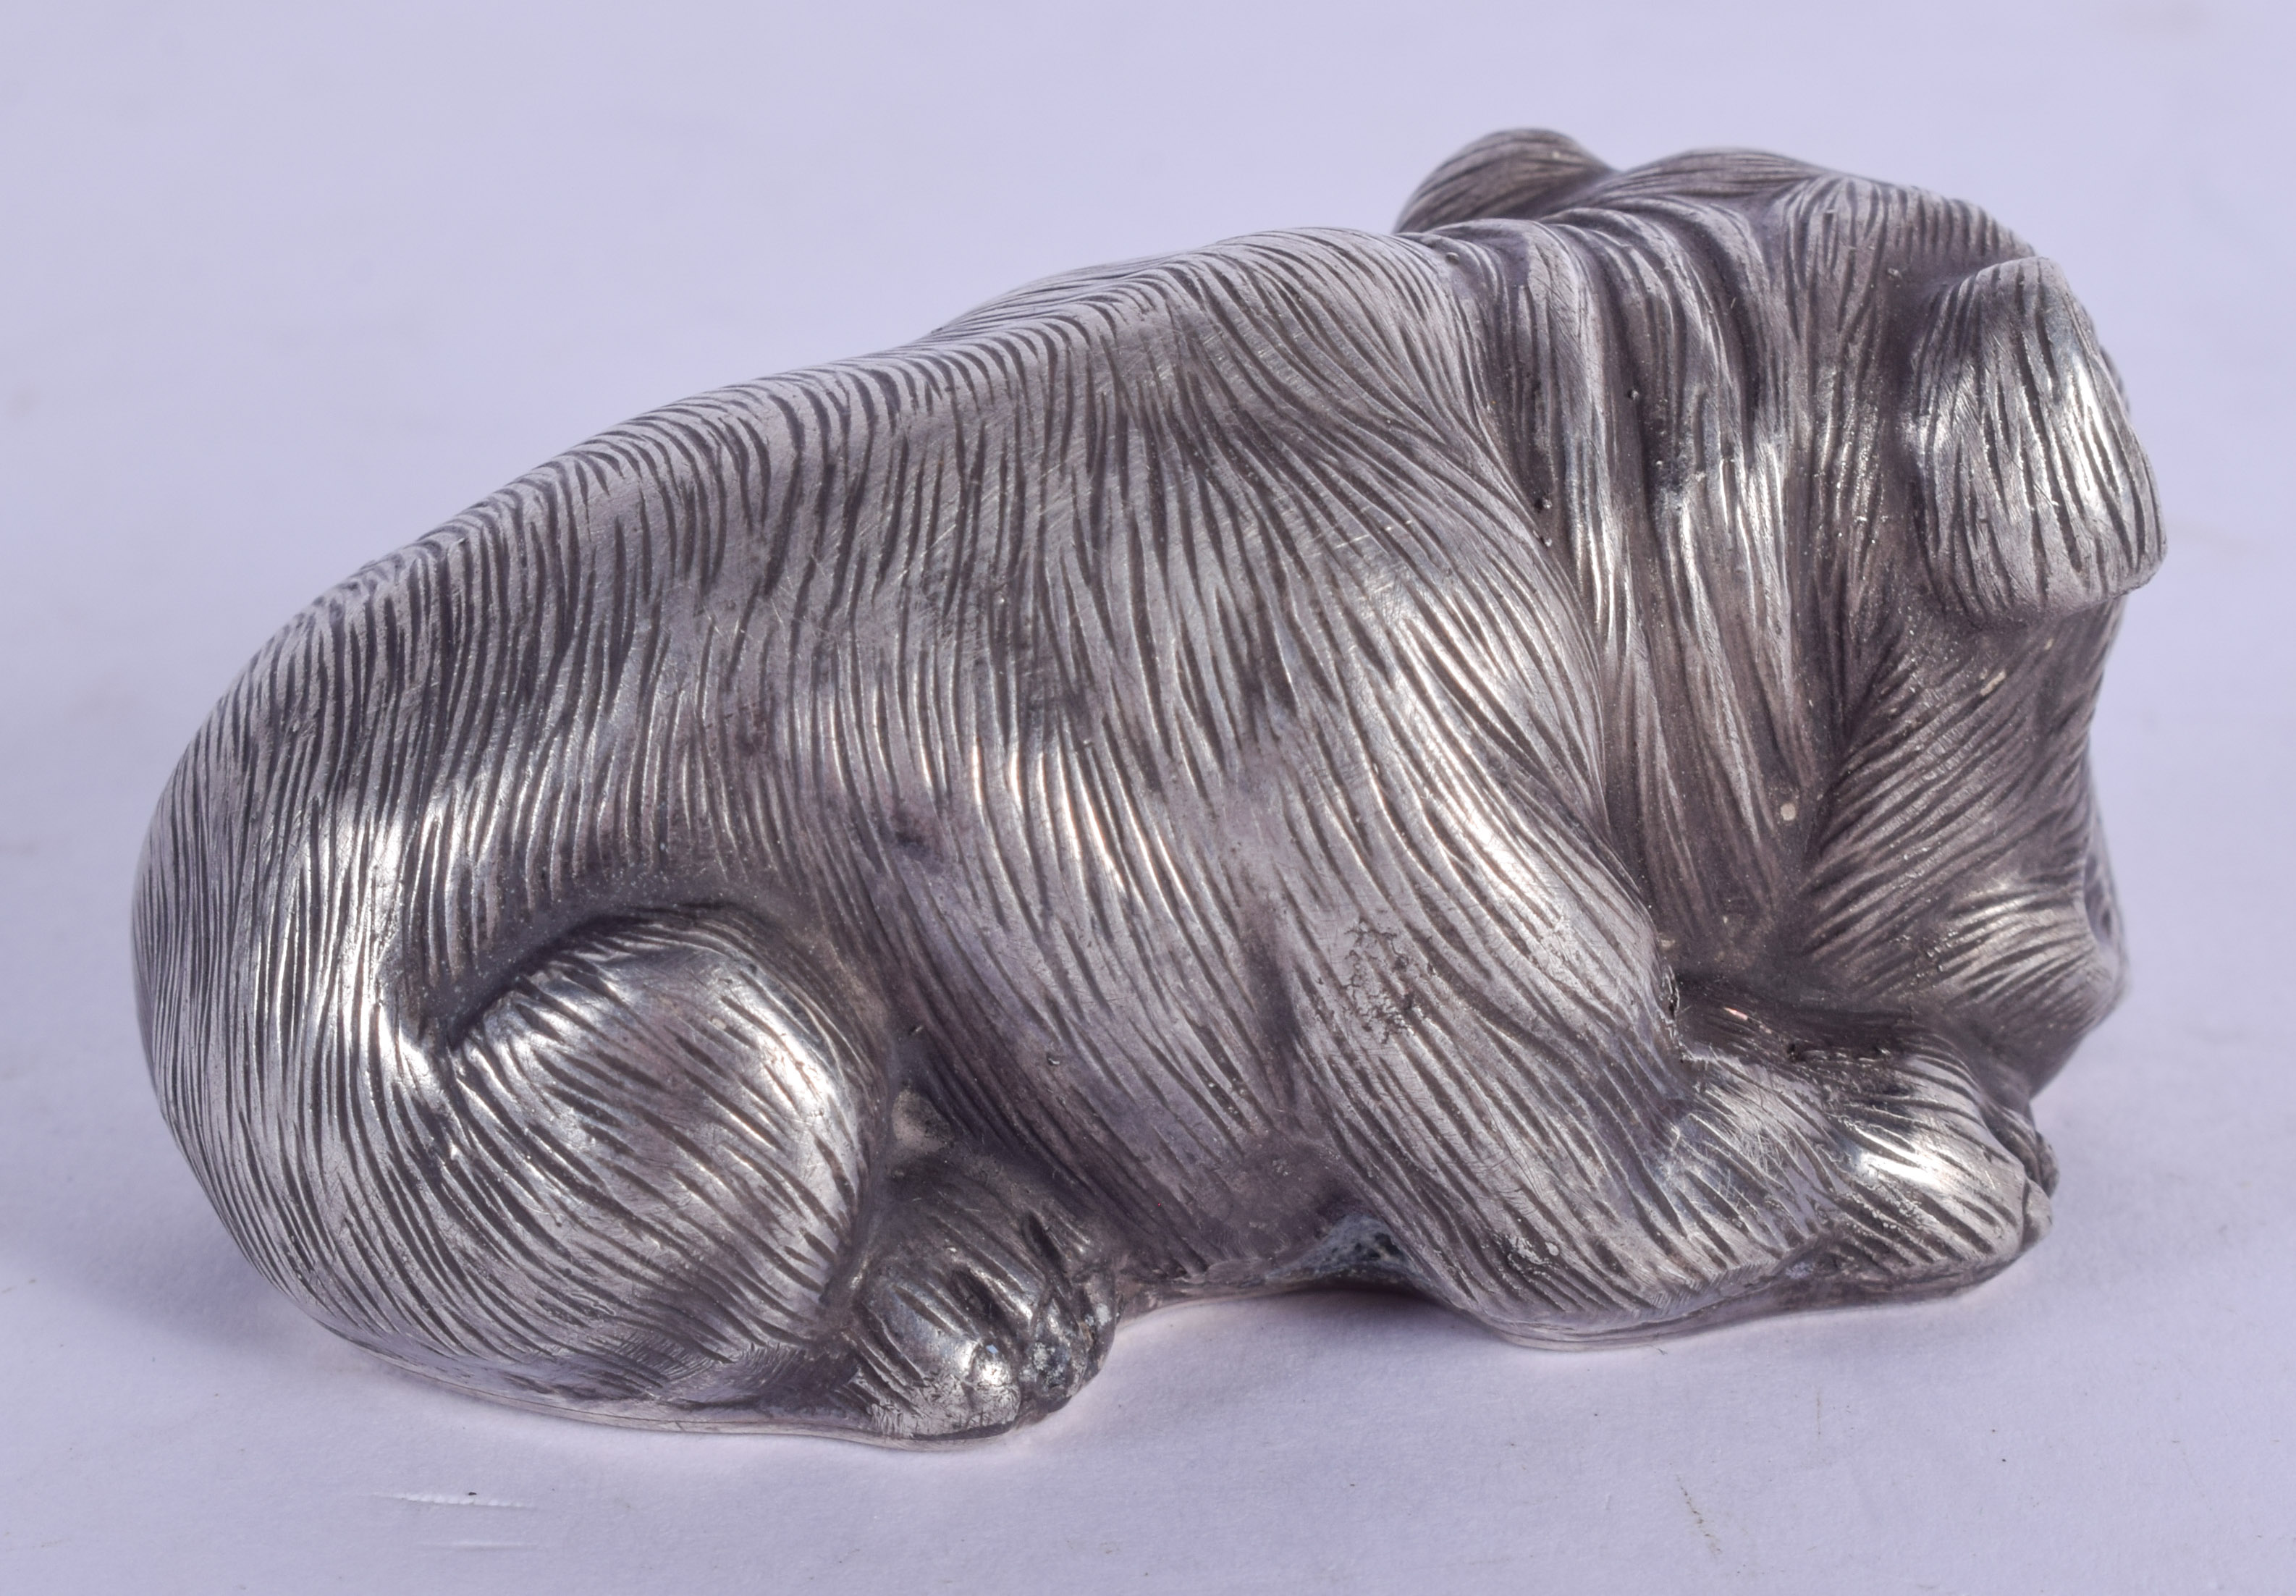 A CONTINENTAL SILVER DOG. 62 grams. 7 cm x 3.5 cm. - Image 2 of 4